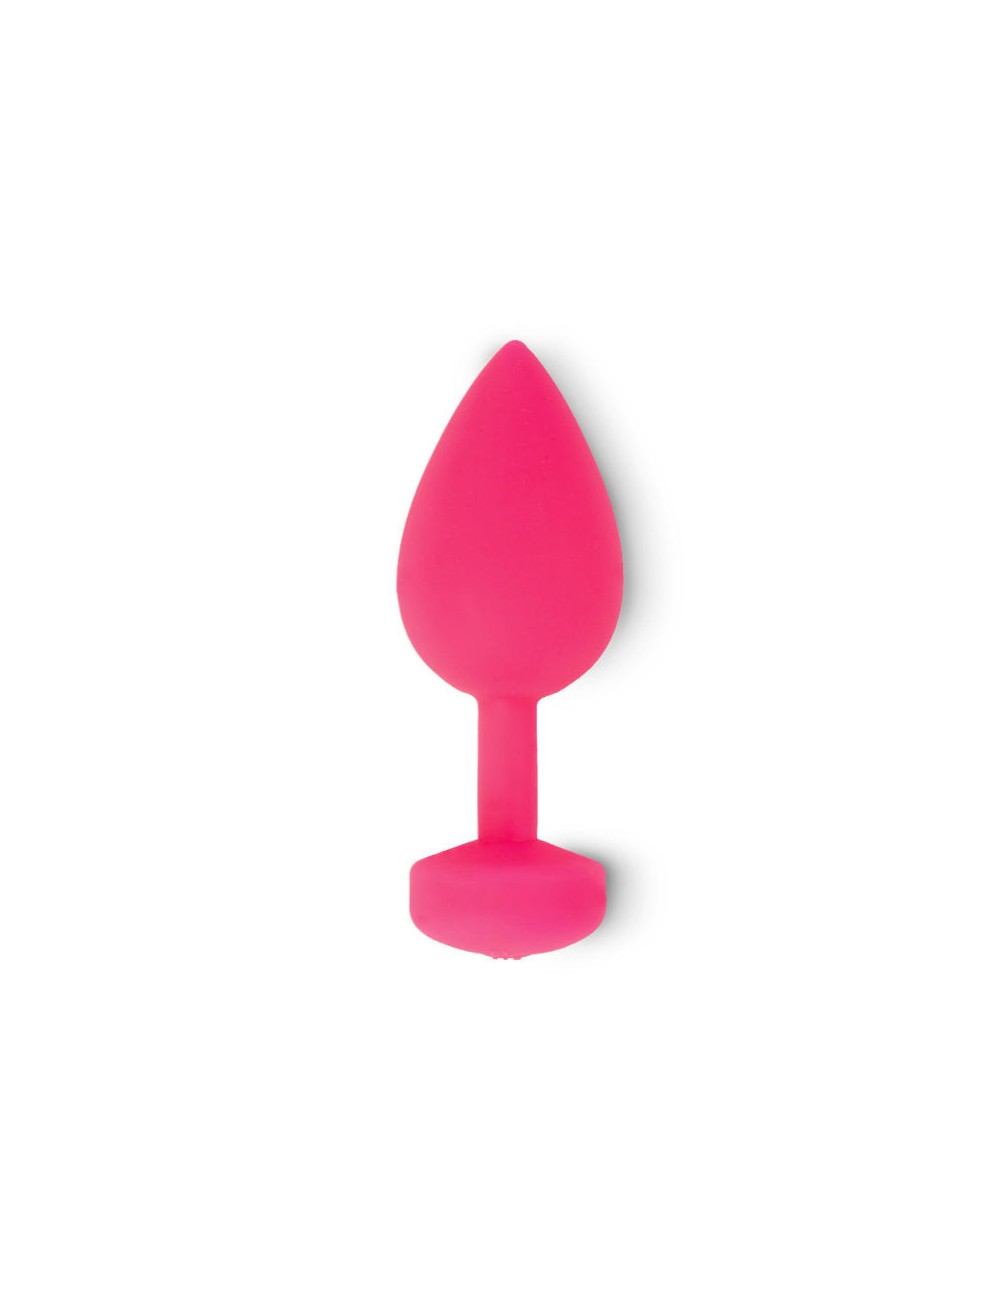 FUNTOYS GPLUG ANAL VIBRATOR RECHARGEABLE SMALL OR PINK NEON 3CM